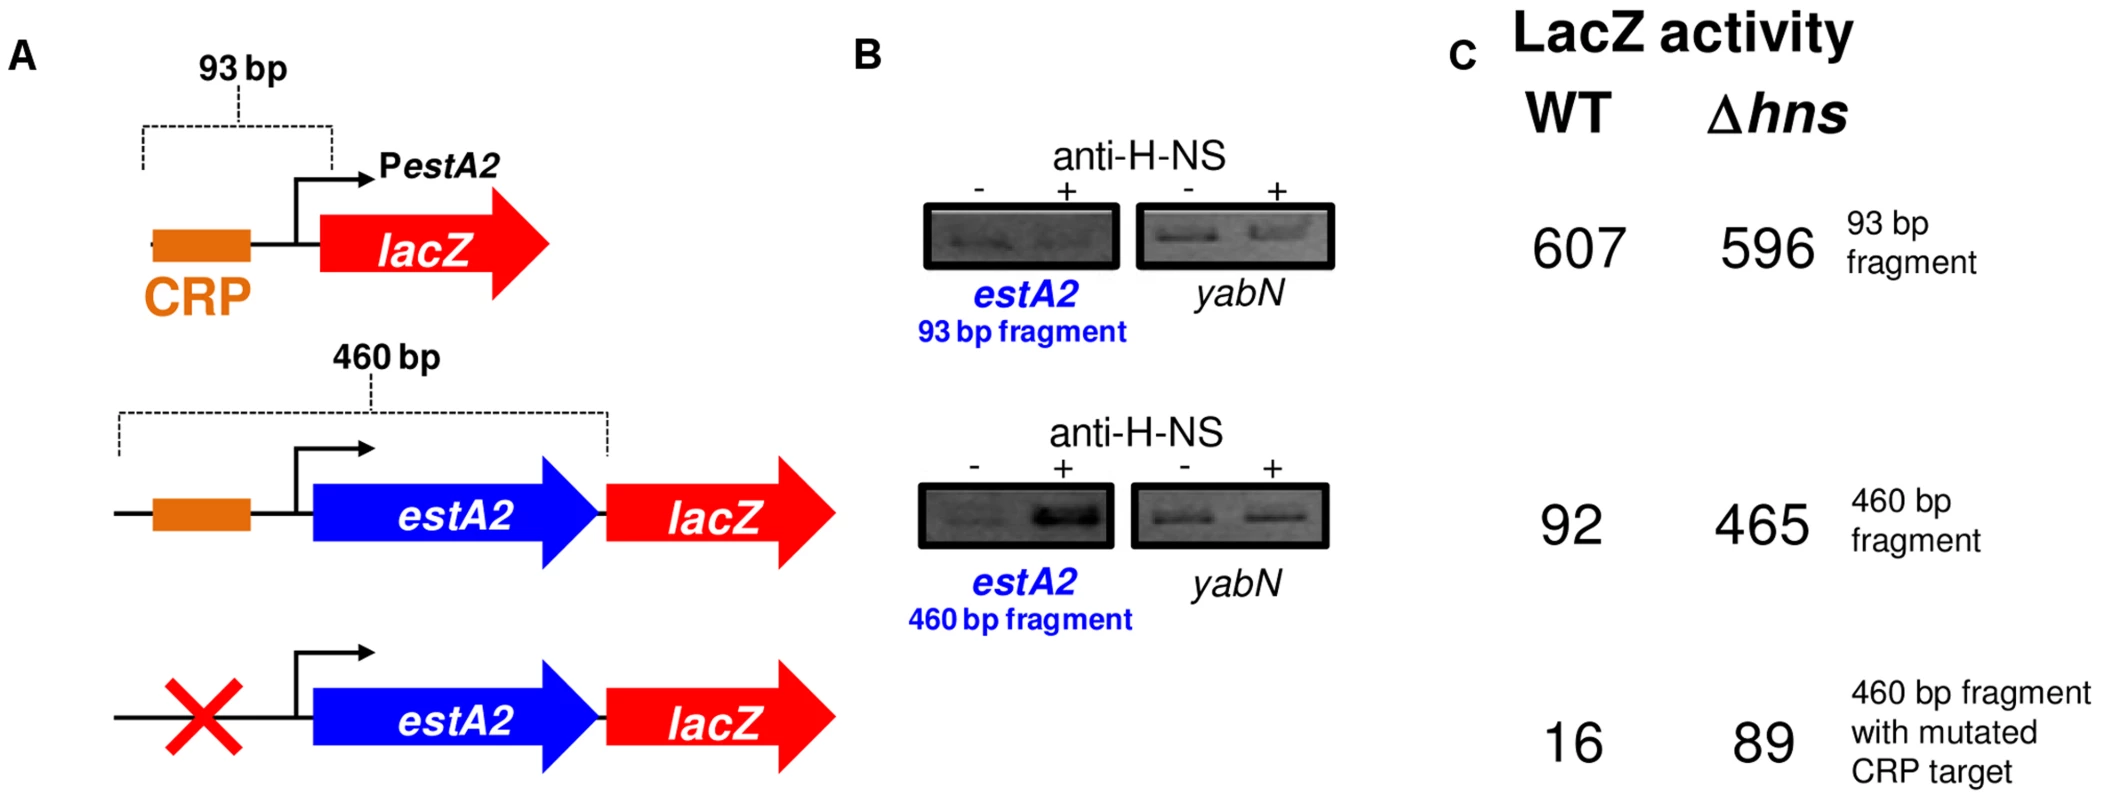 The <i>estA2</i> promoter is repressed by H-NS.